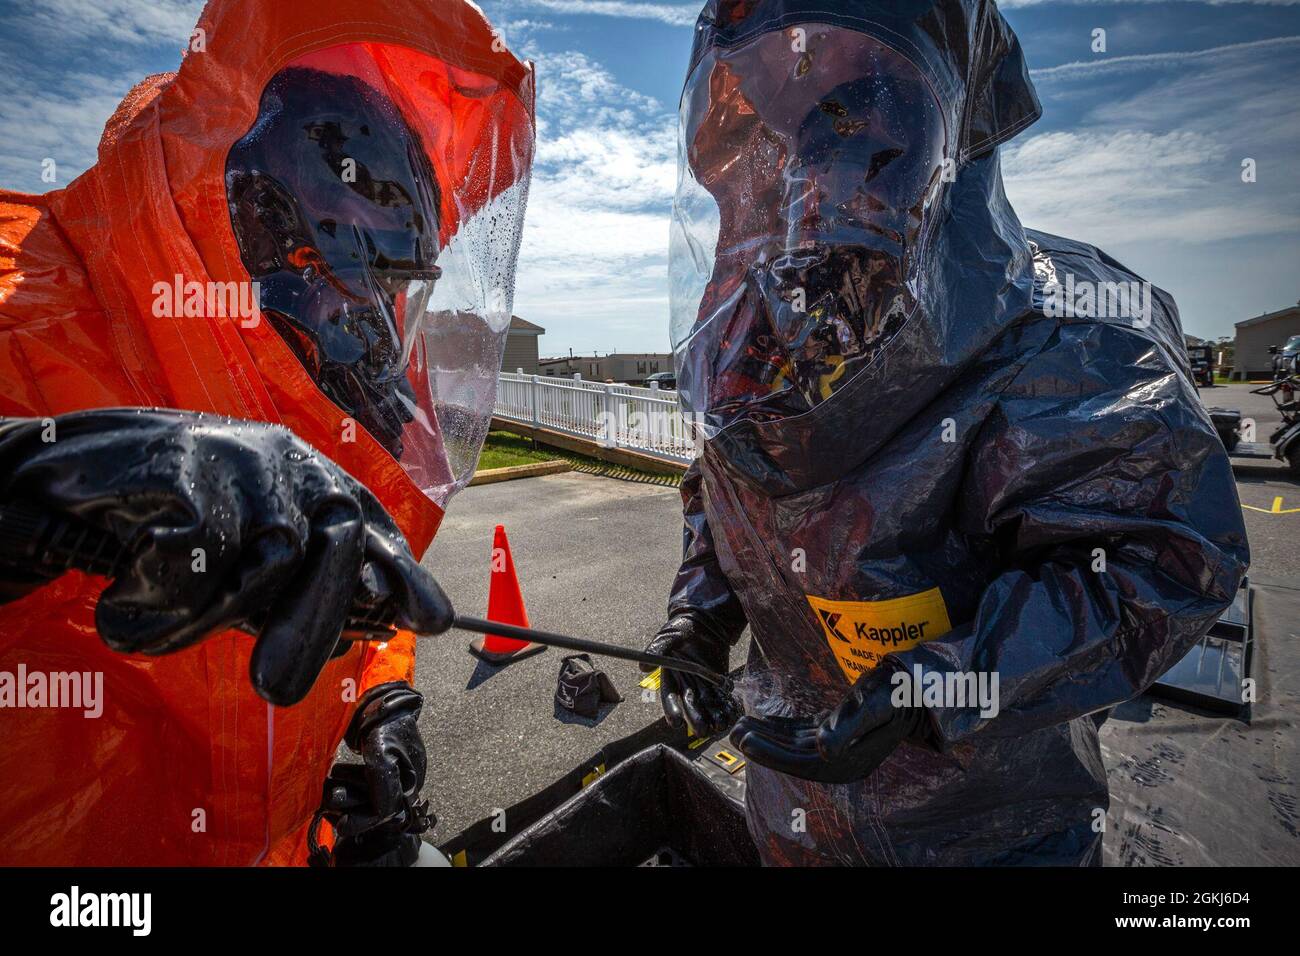 U.S. Army Staff Sgt. Mauricio Caceres, left, decontaminates Sgt. Quran T. Williams, both survey team members with the  21st Weapons of Mass Destruction-Civil Support Team (21st WMD-CST), New Jersey National Guard, during an Army North mandated training proficiency evaluation at the Bethany Beach Training Site, Bethany Beach, Del., April 29, 2021. The 21st WMD-CST supports civil authorities at man-made or natural disasters by identifying chemical, biological, radiological, and nuclear substances, assess the consequences, and advises on response measures. Stock Photo